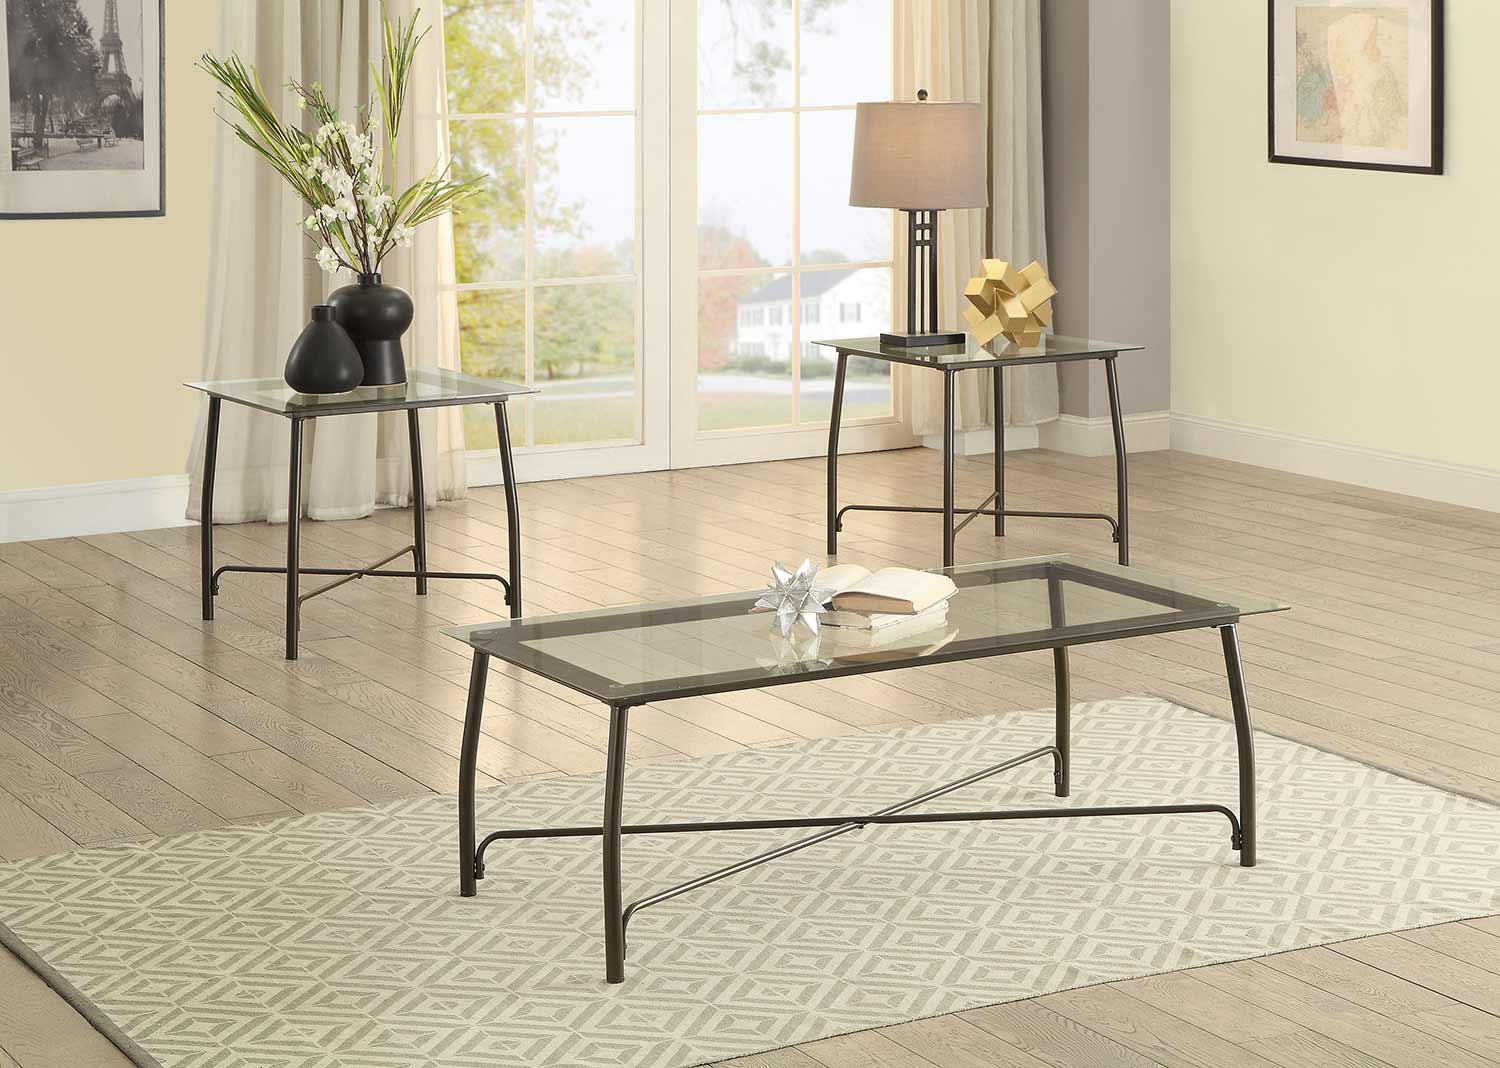 Homelegance Suisun 3-Piece Occasional Tables with Glass Top